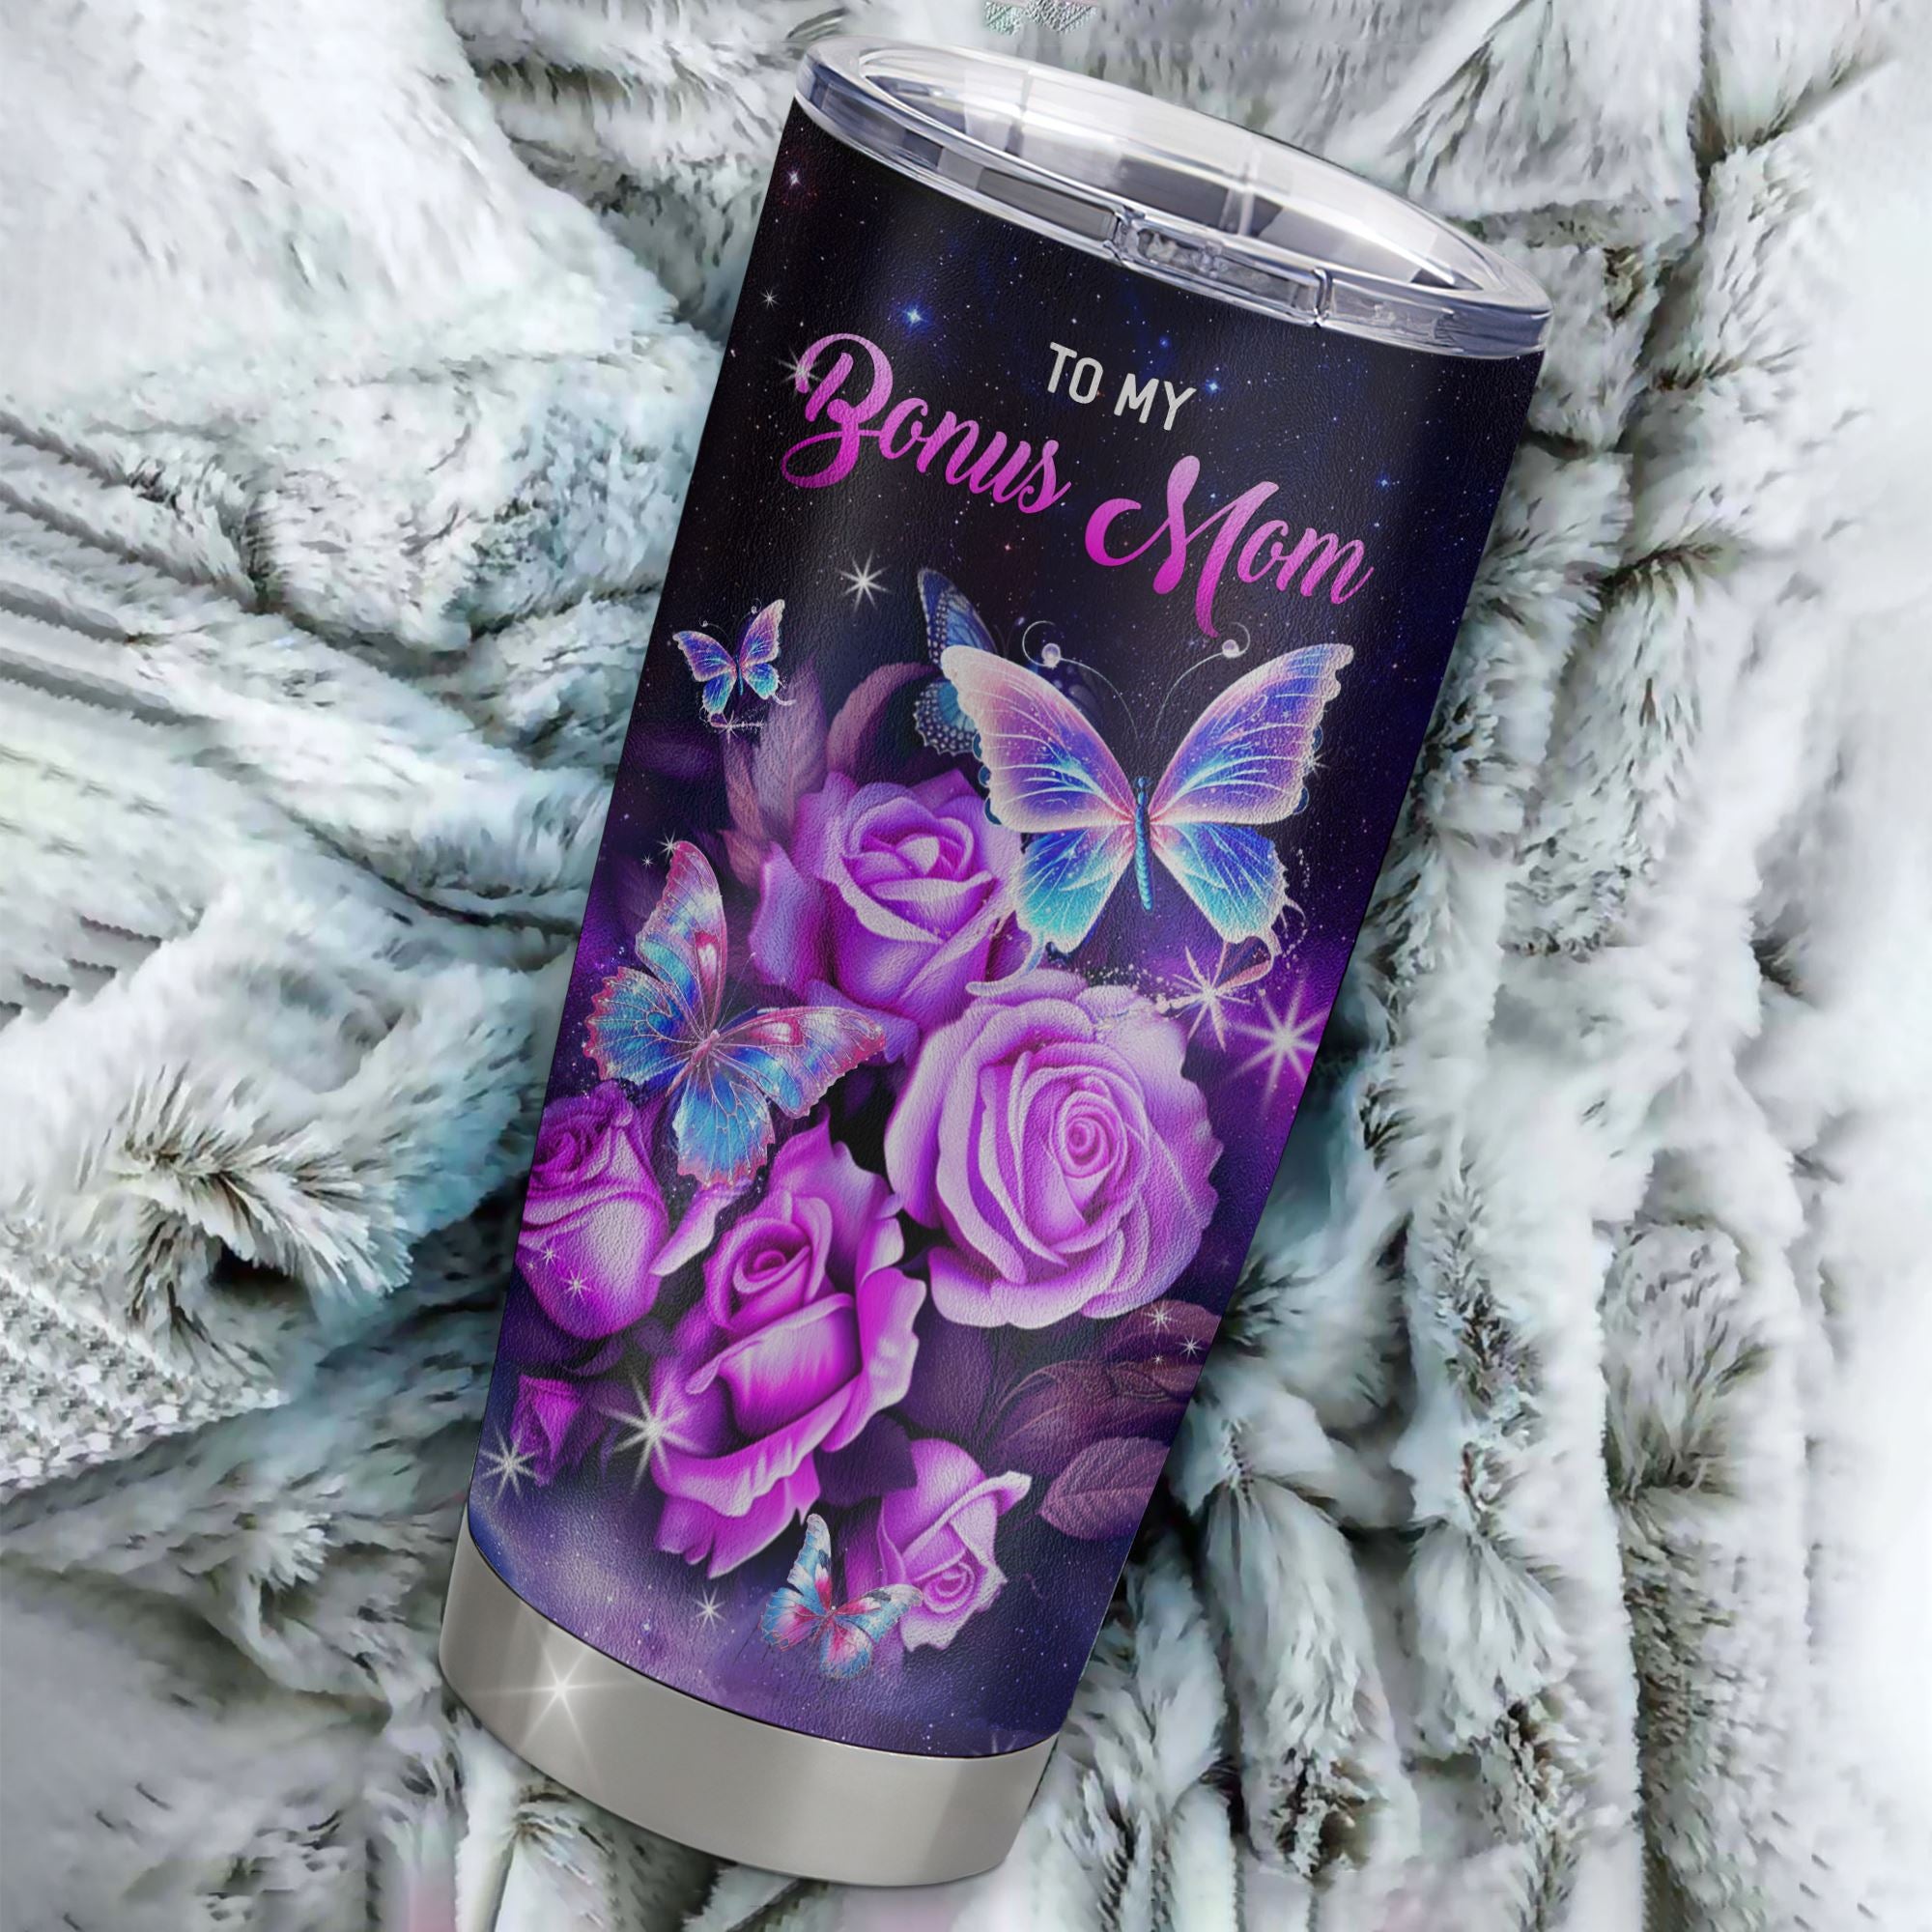 Personalized_To_My_Bonus_Mom_Tumbler_From_Stepdaughter_Stainless_Steel_Cup_Grateful_Thank_You_Butterfly_Stepmom_Gift_Birthday_Thanksgiving_Christmas_Travel_Mug_Tumbler_mockup_1.jpg